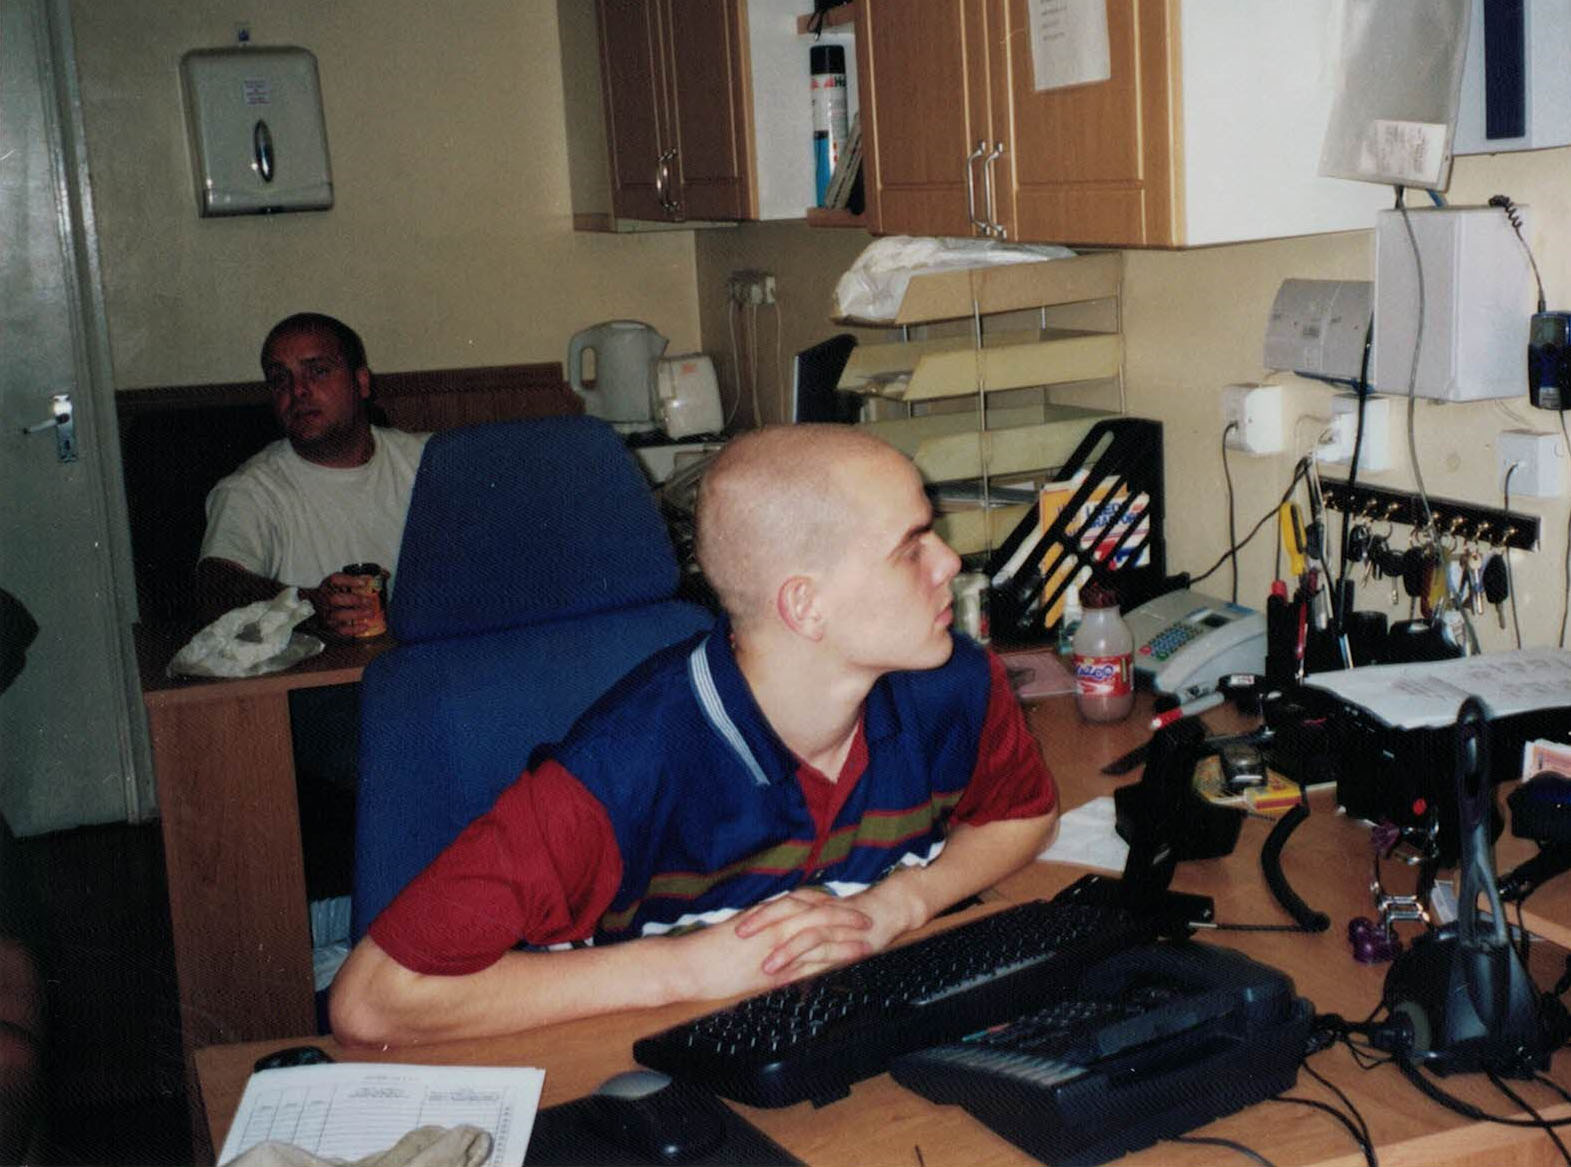 Les and David hard at work in the Flackwell Heath office - circa 2006